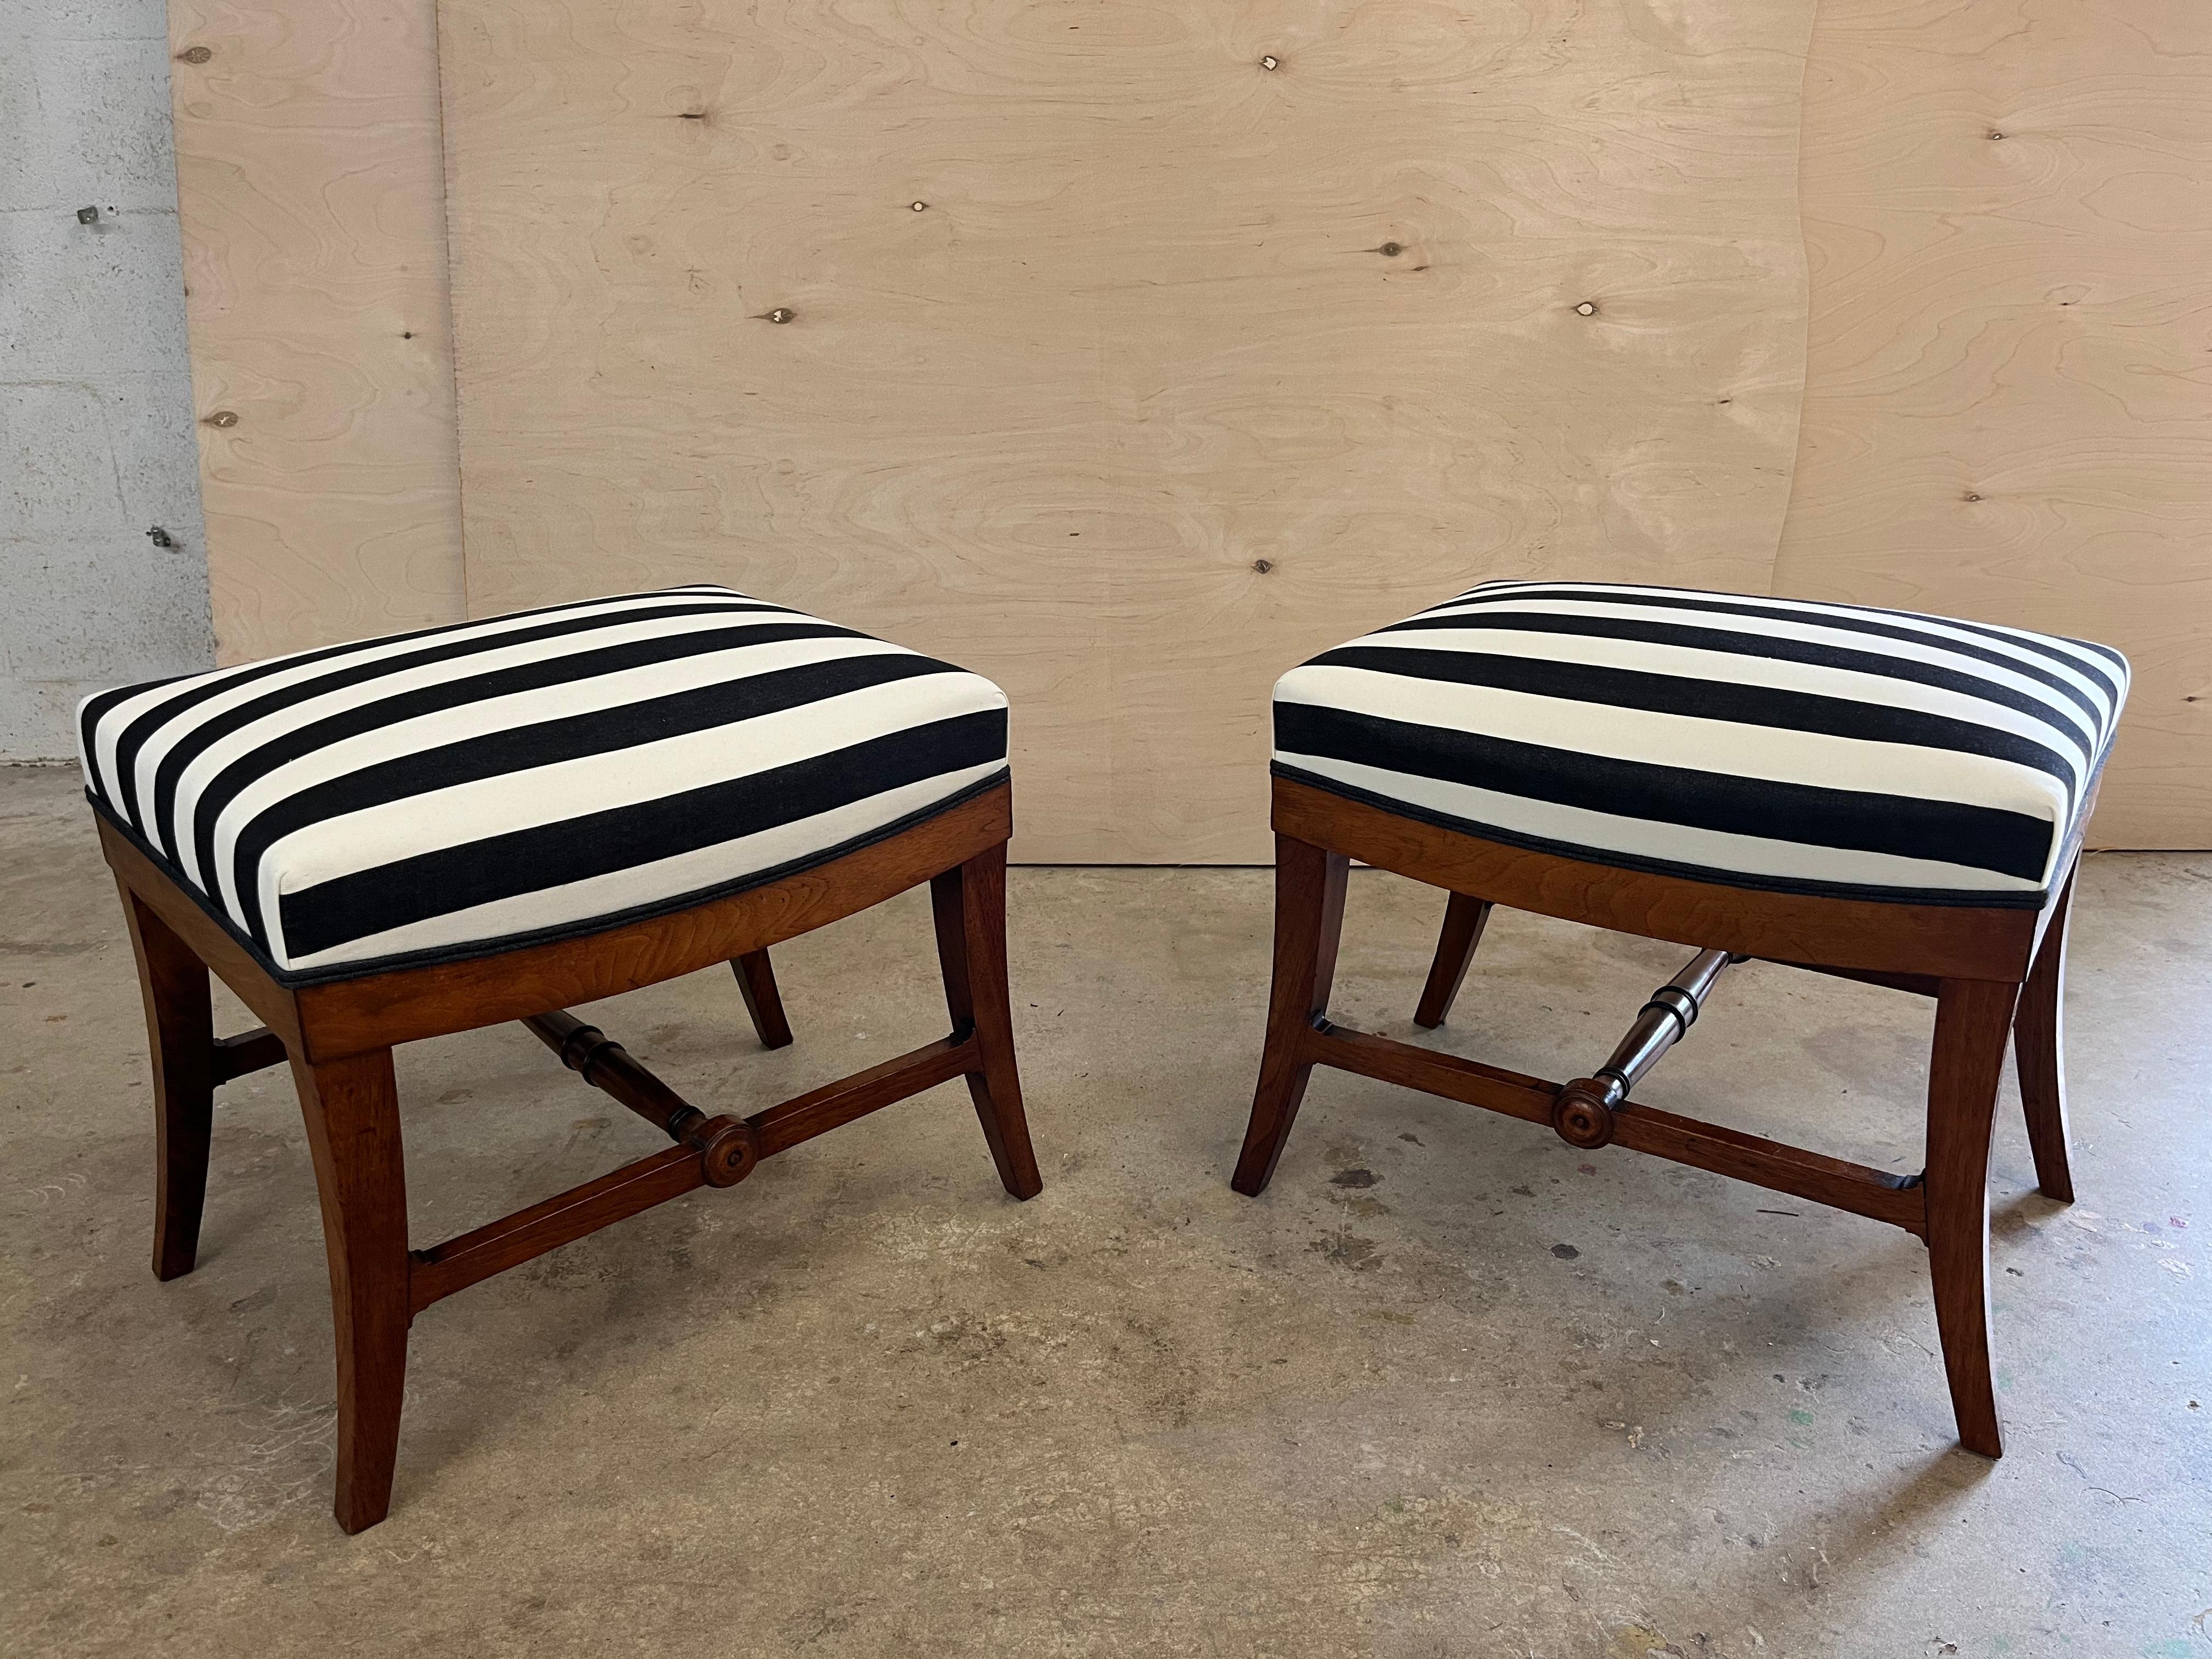 Late 19th Century Beautiful Antique Scandinavian Ottomans Stools  For Sale